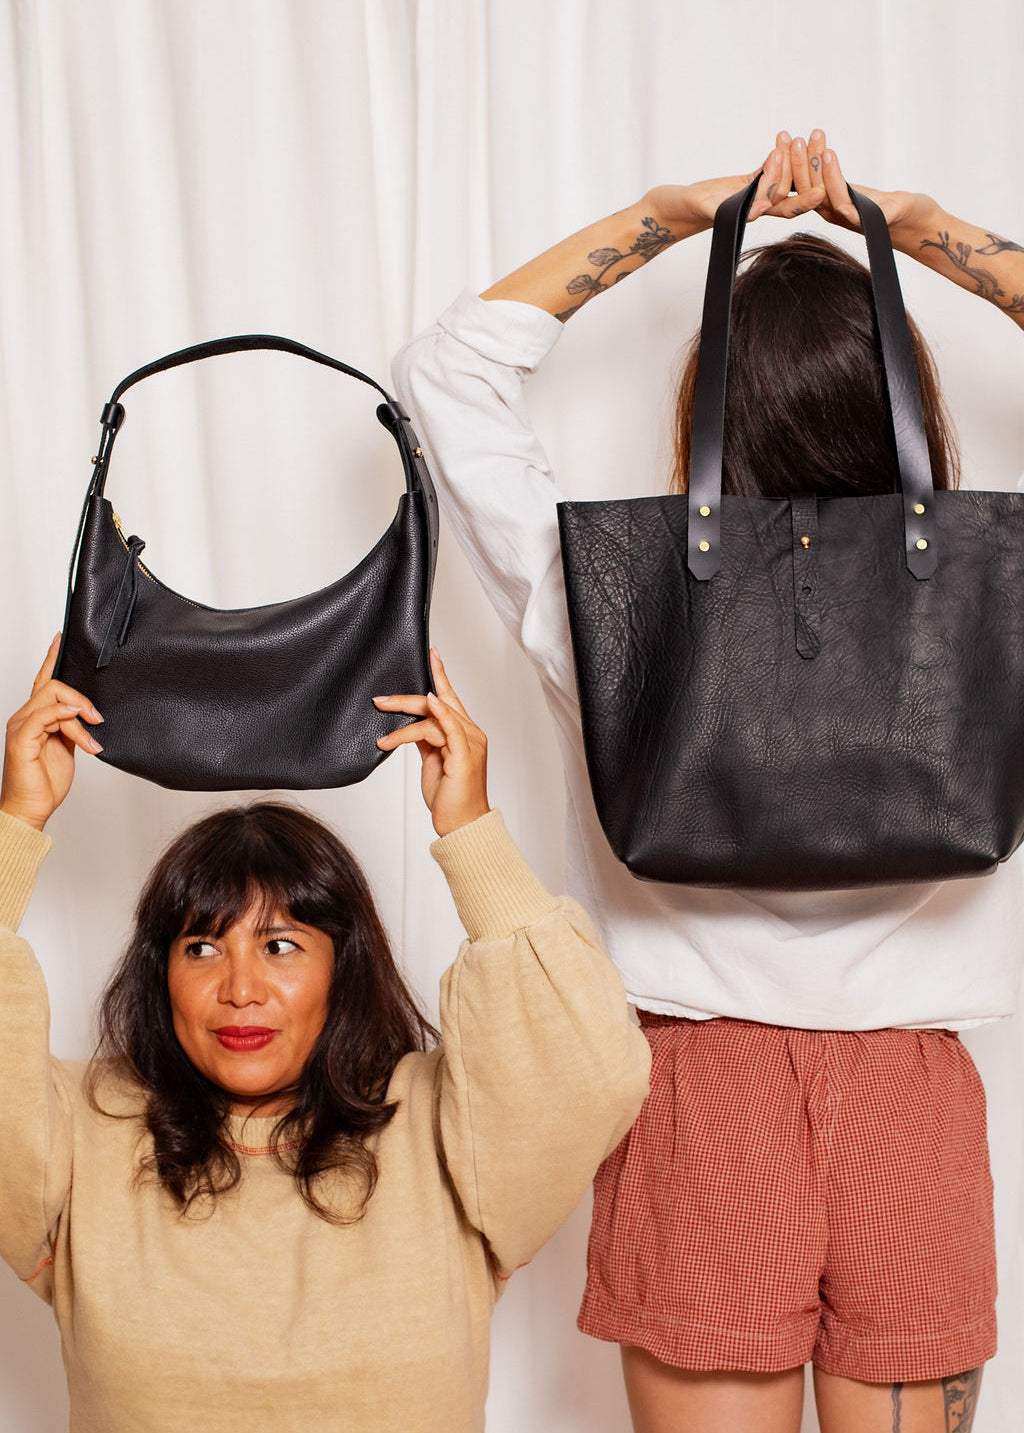 SOBEL CLASSIC TOTE | BLACK Leather Bag - handcrafted by Market Canvas Leather in Tofino, BC, Canada